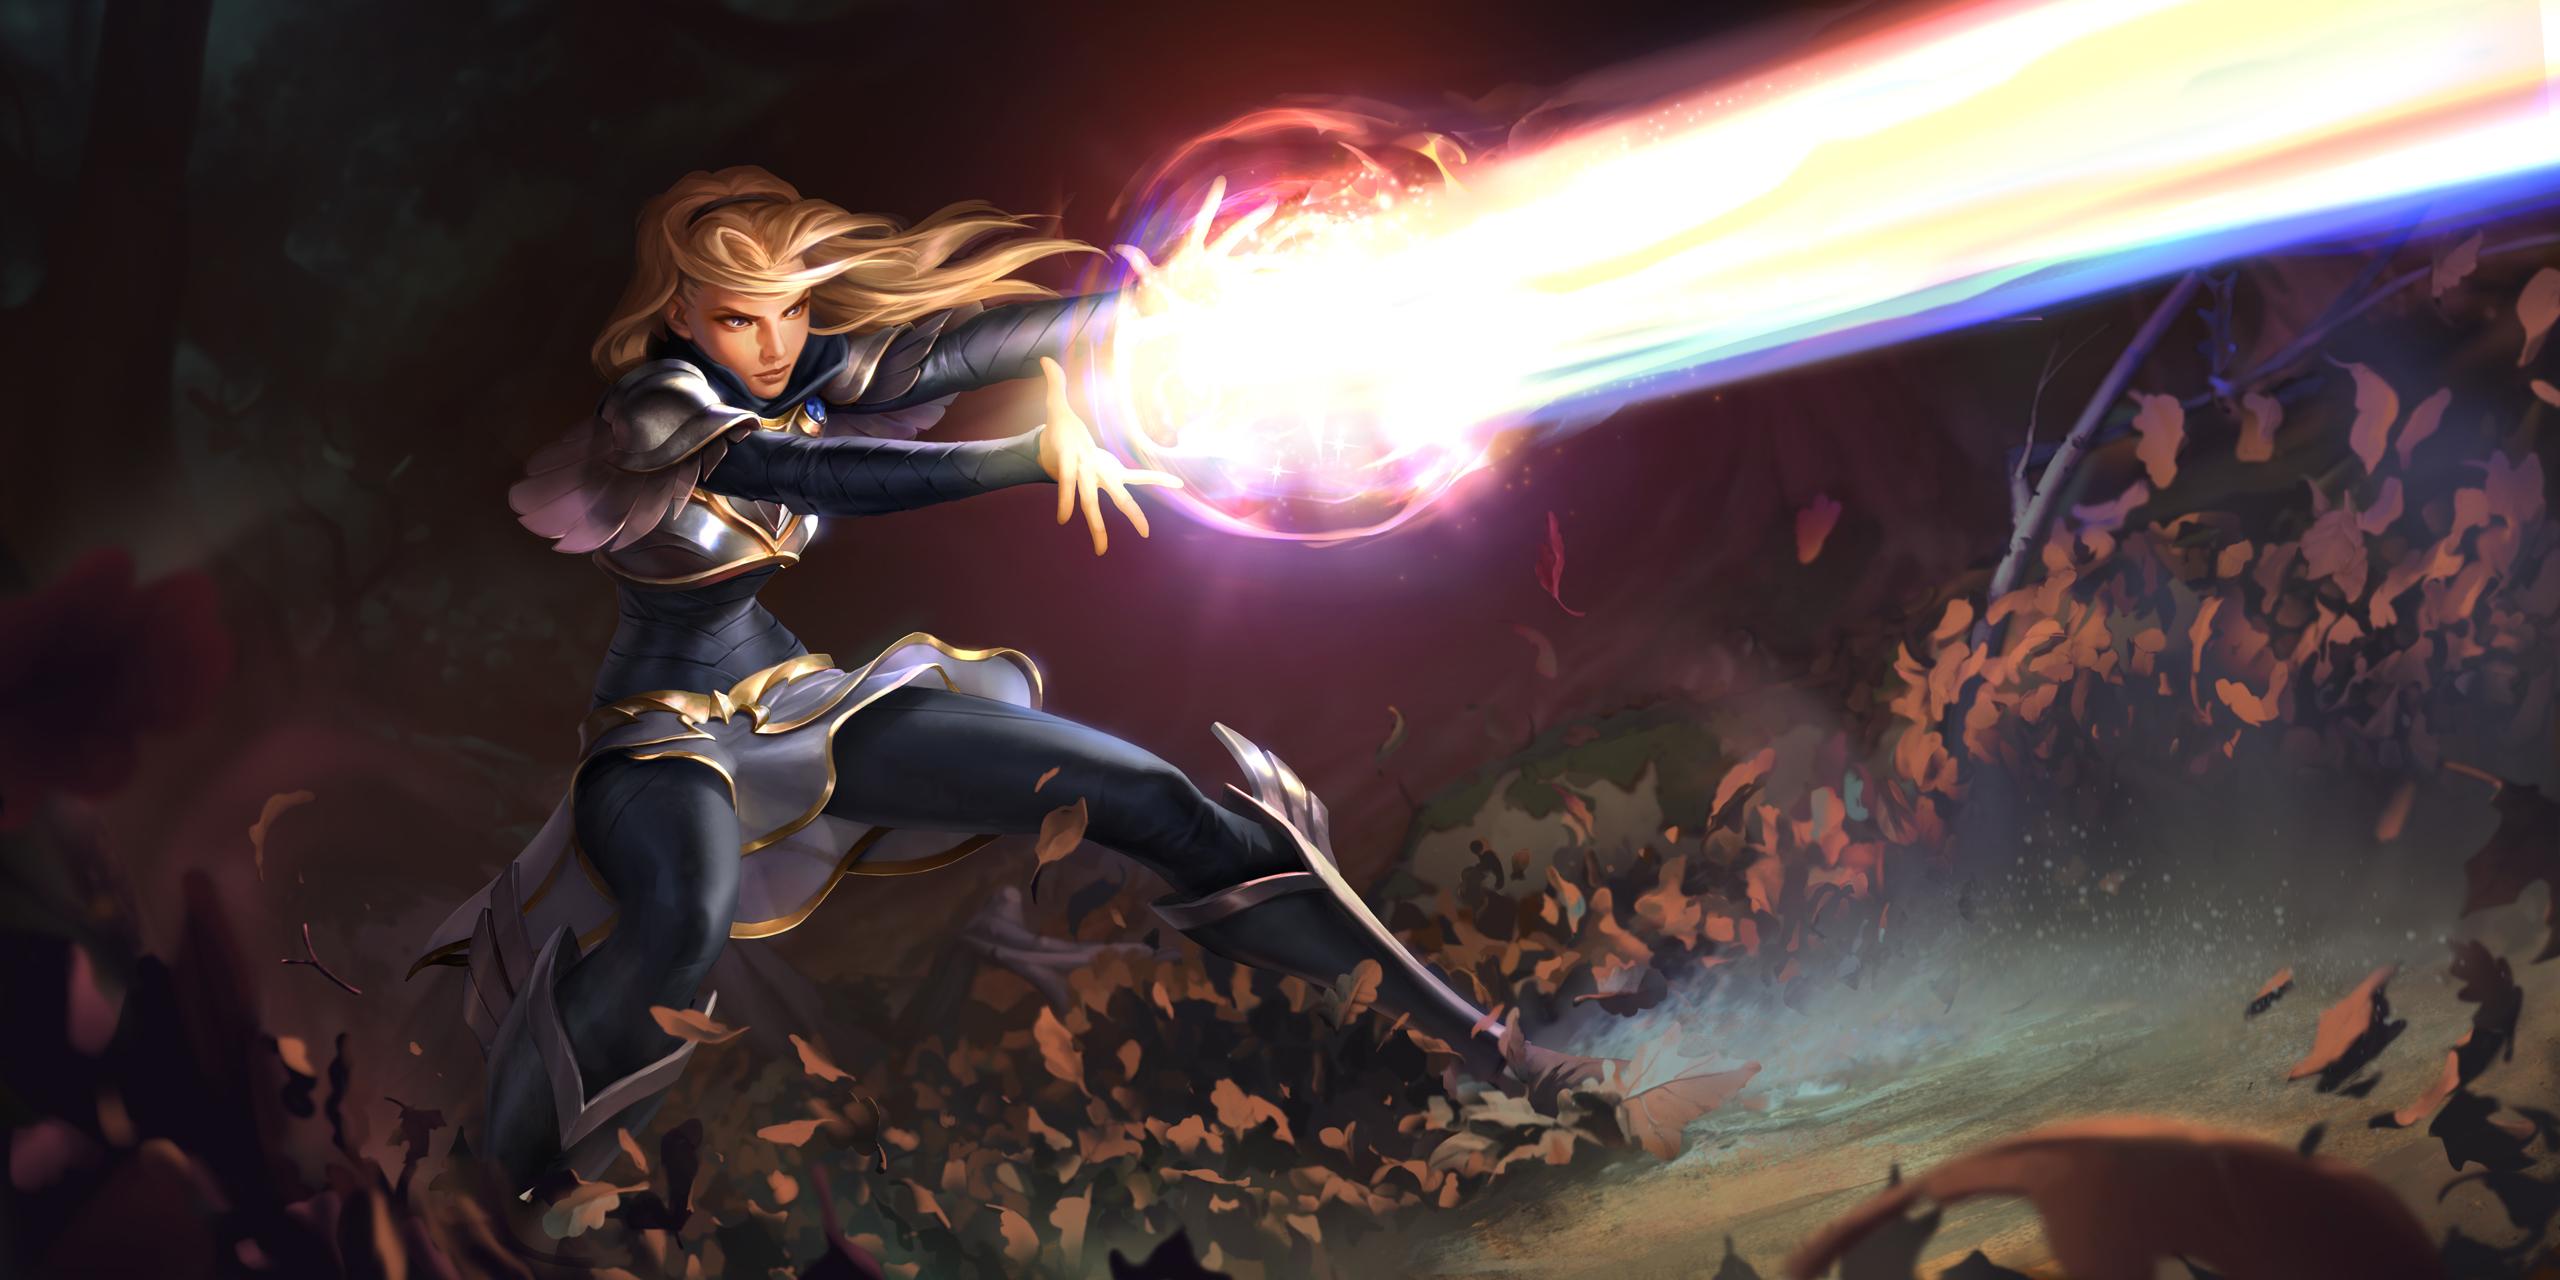 Lux's new art is AMAZING and my now my new permanent wallpaper!